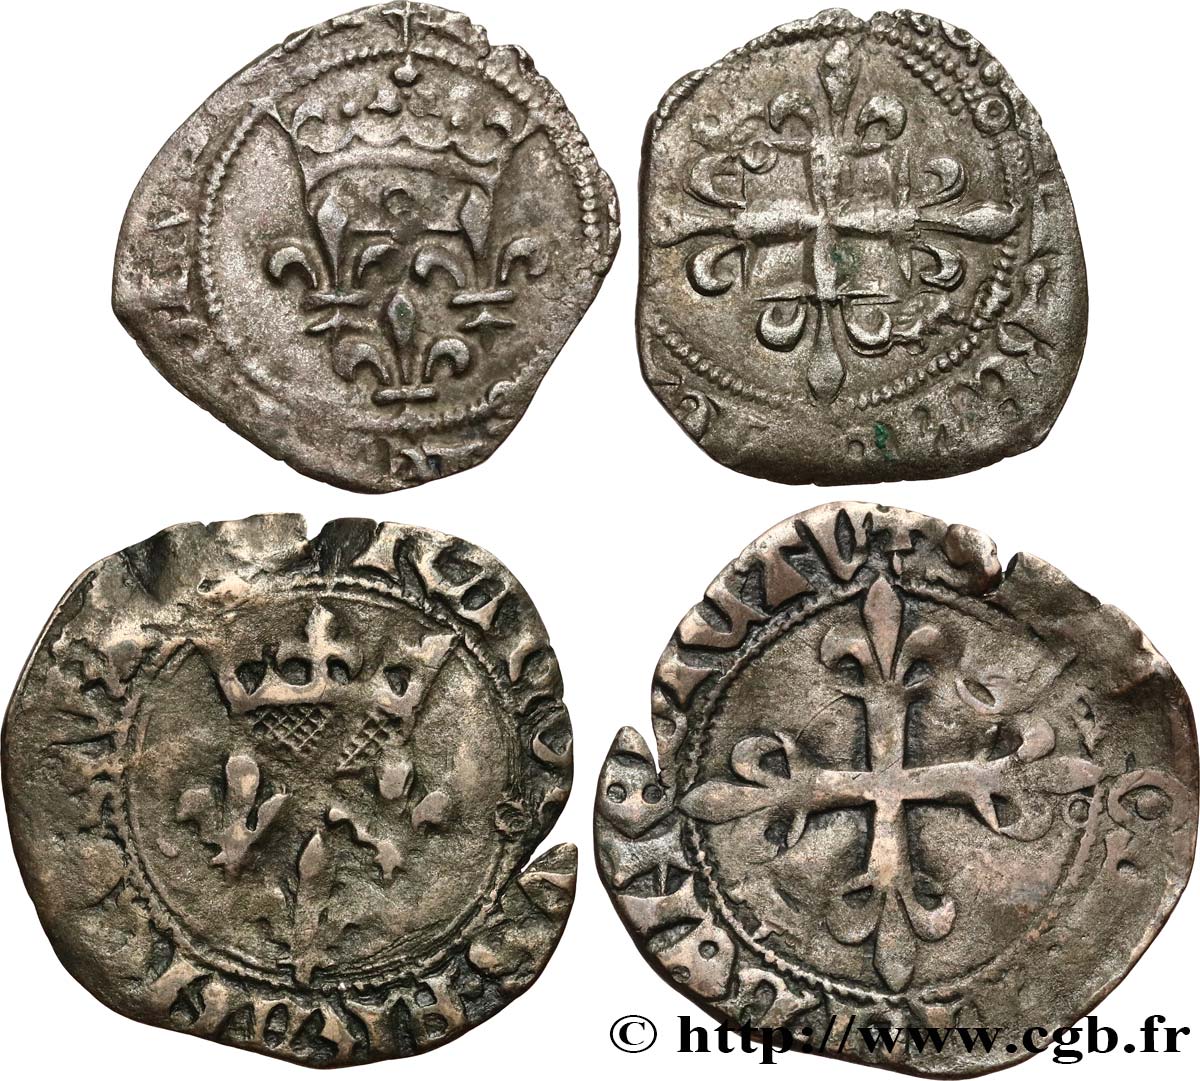 CHARLES, REGENCY - COINAGE WITH THE NAME OF CHARLES VI Lot de 2 x gros dit  florette  n.d. Atelier divers S